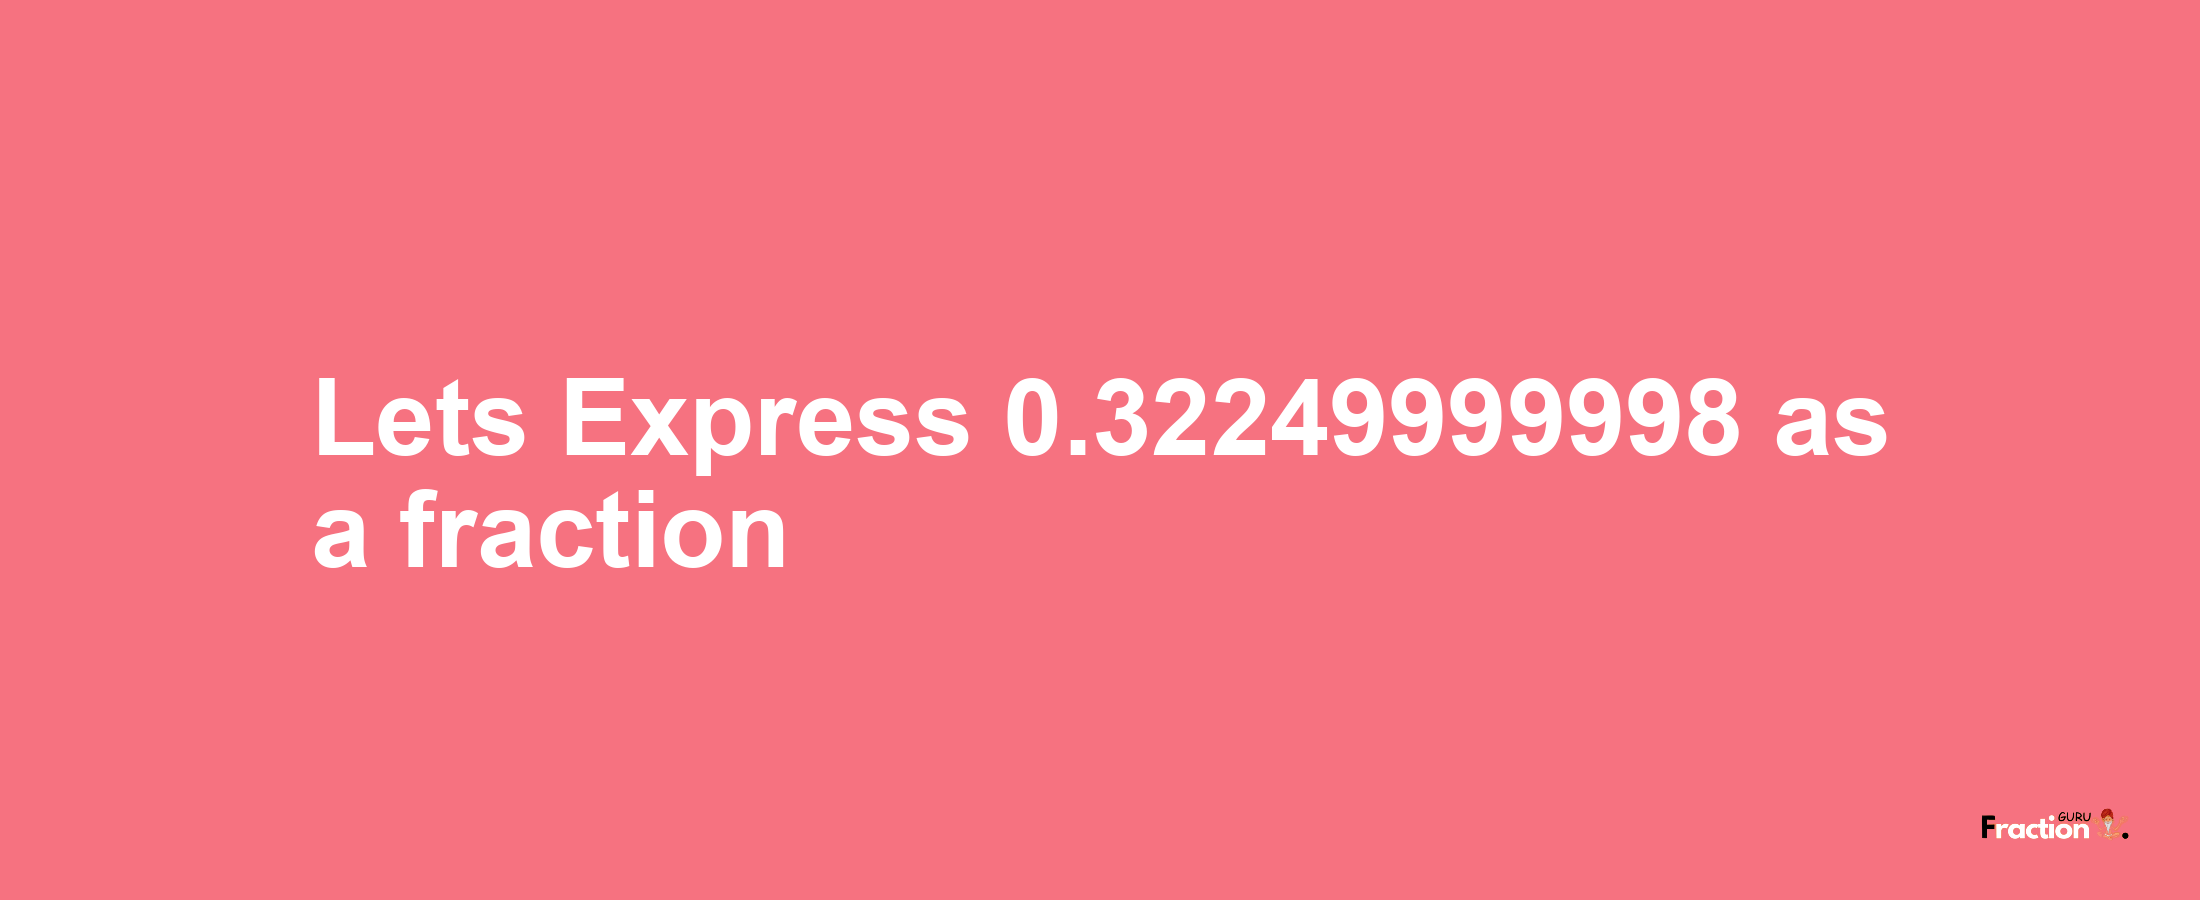 Lets Express 0.32249999998 as afraction